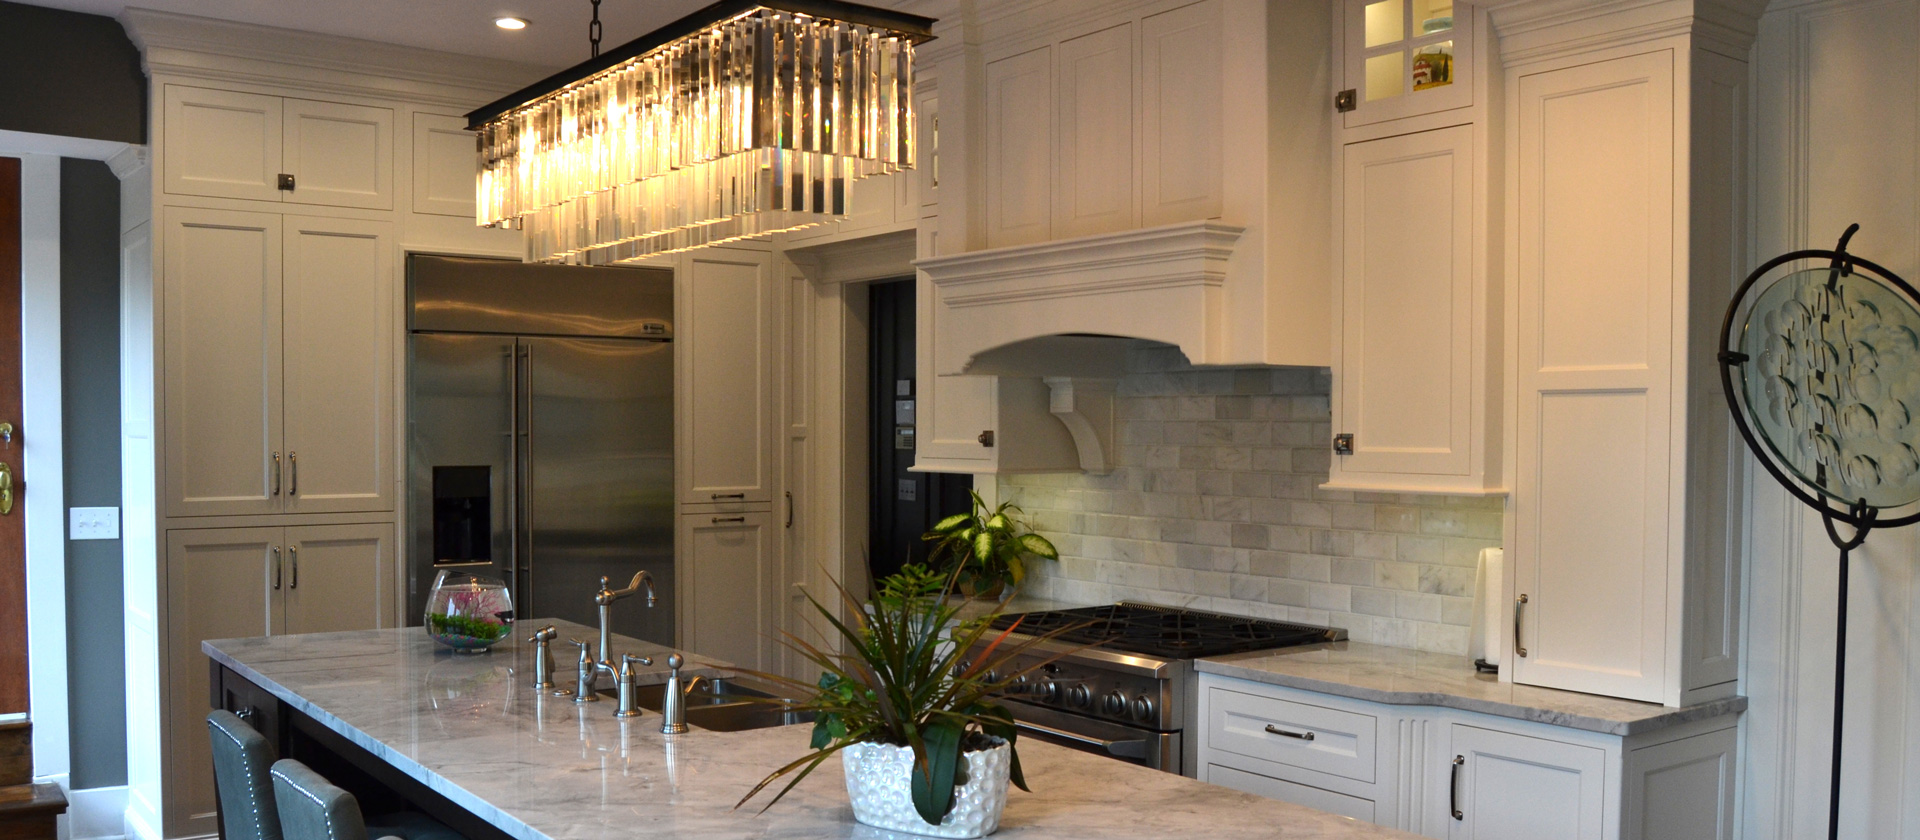 welcome to our custom kitchen design